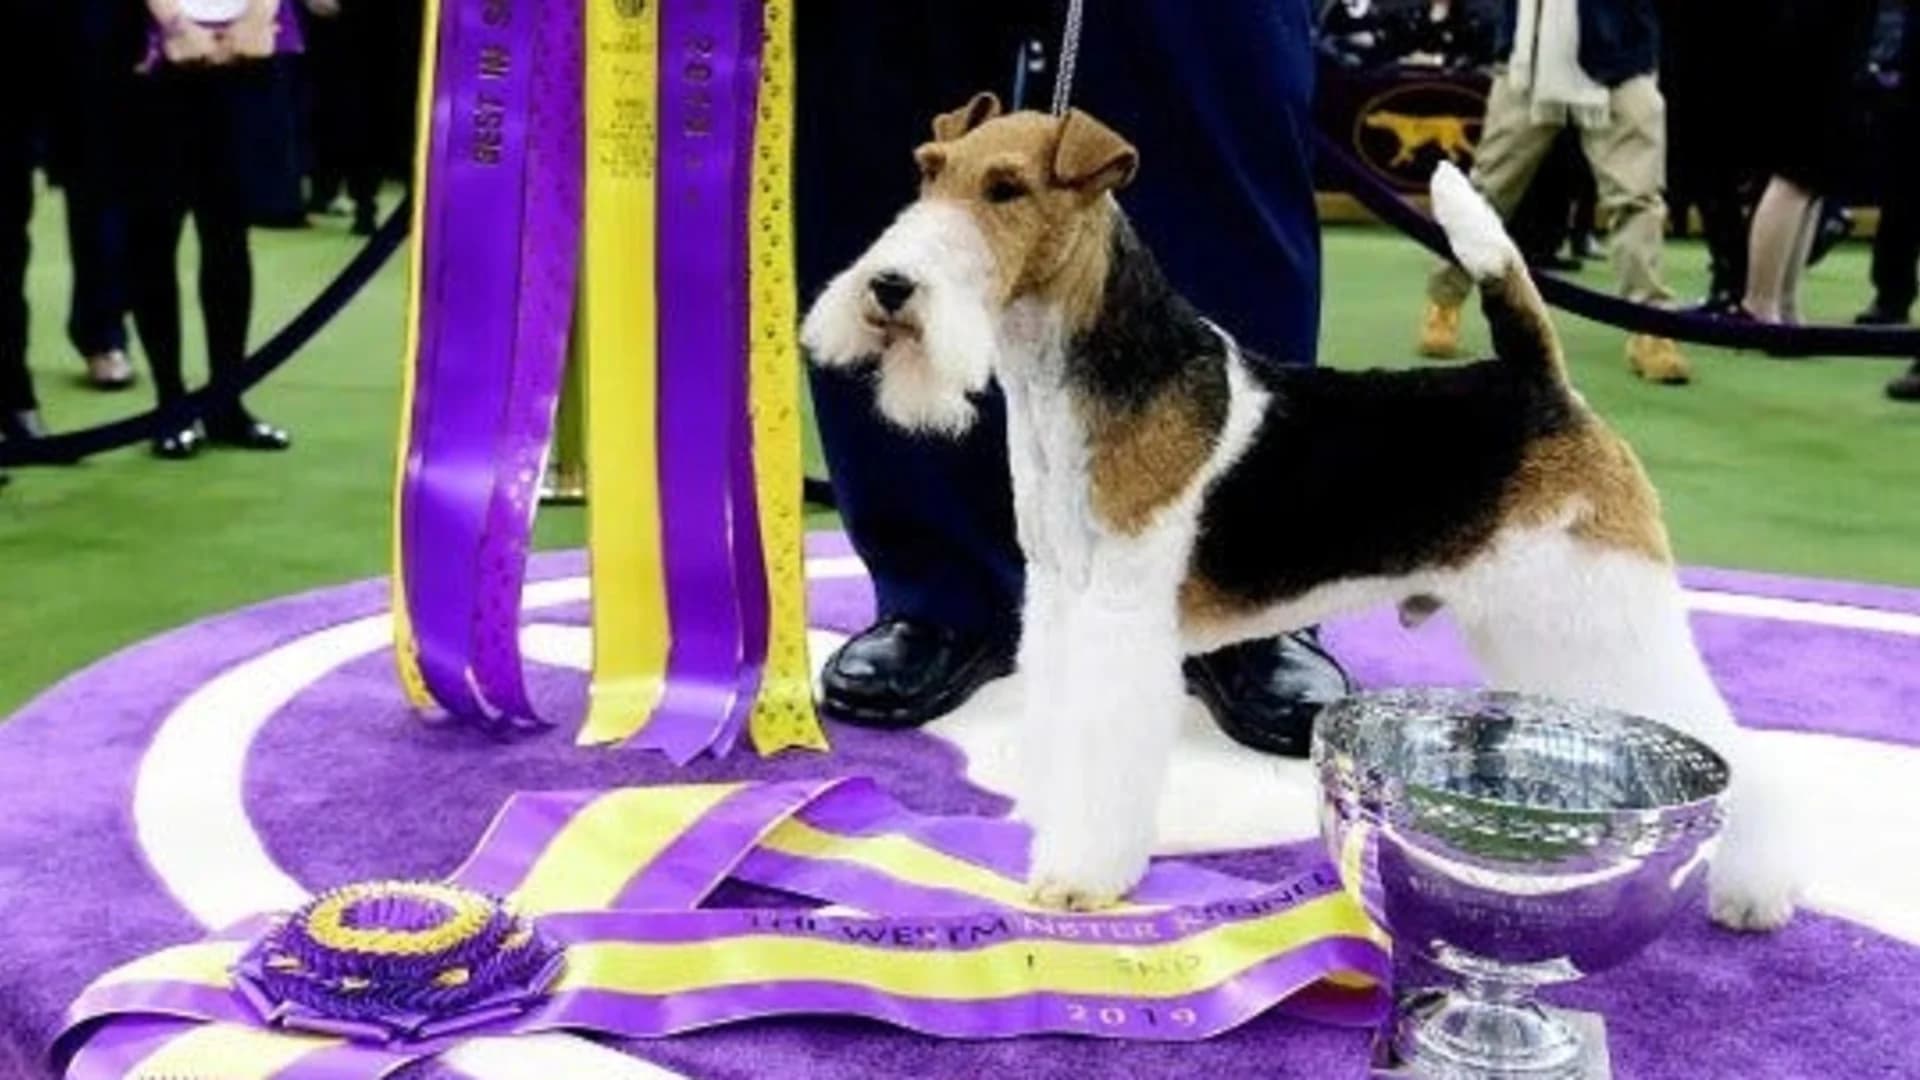 Westminster Kennel Club's annual dog show trots into New York